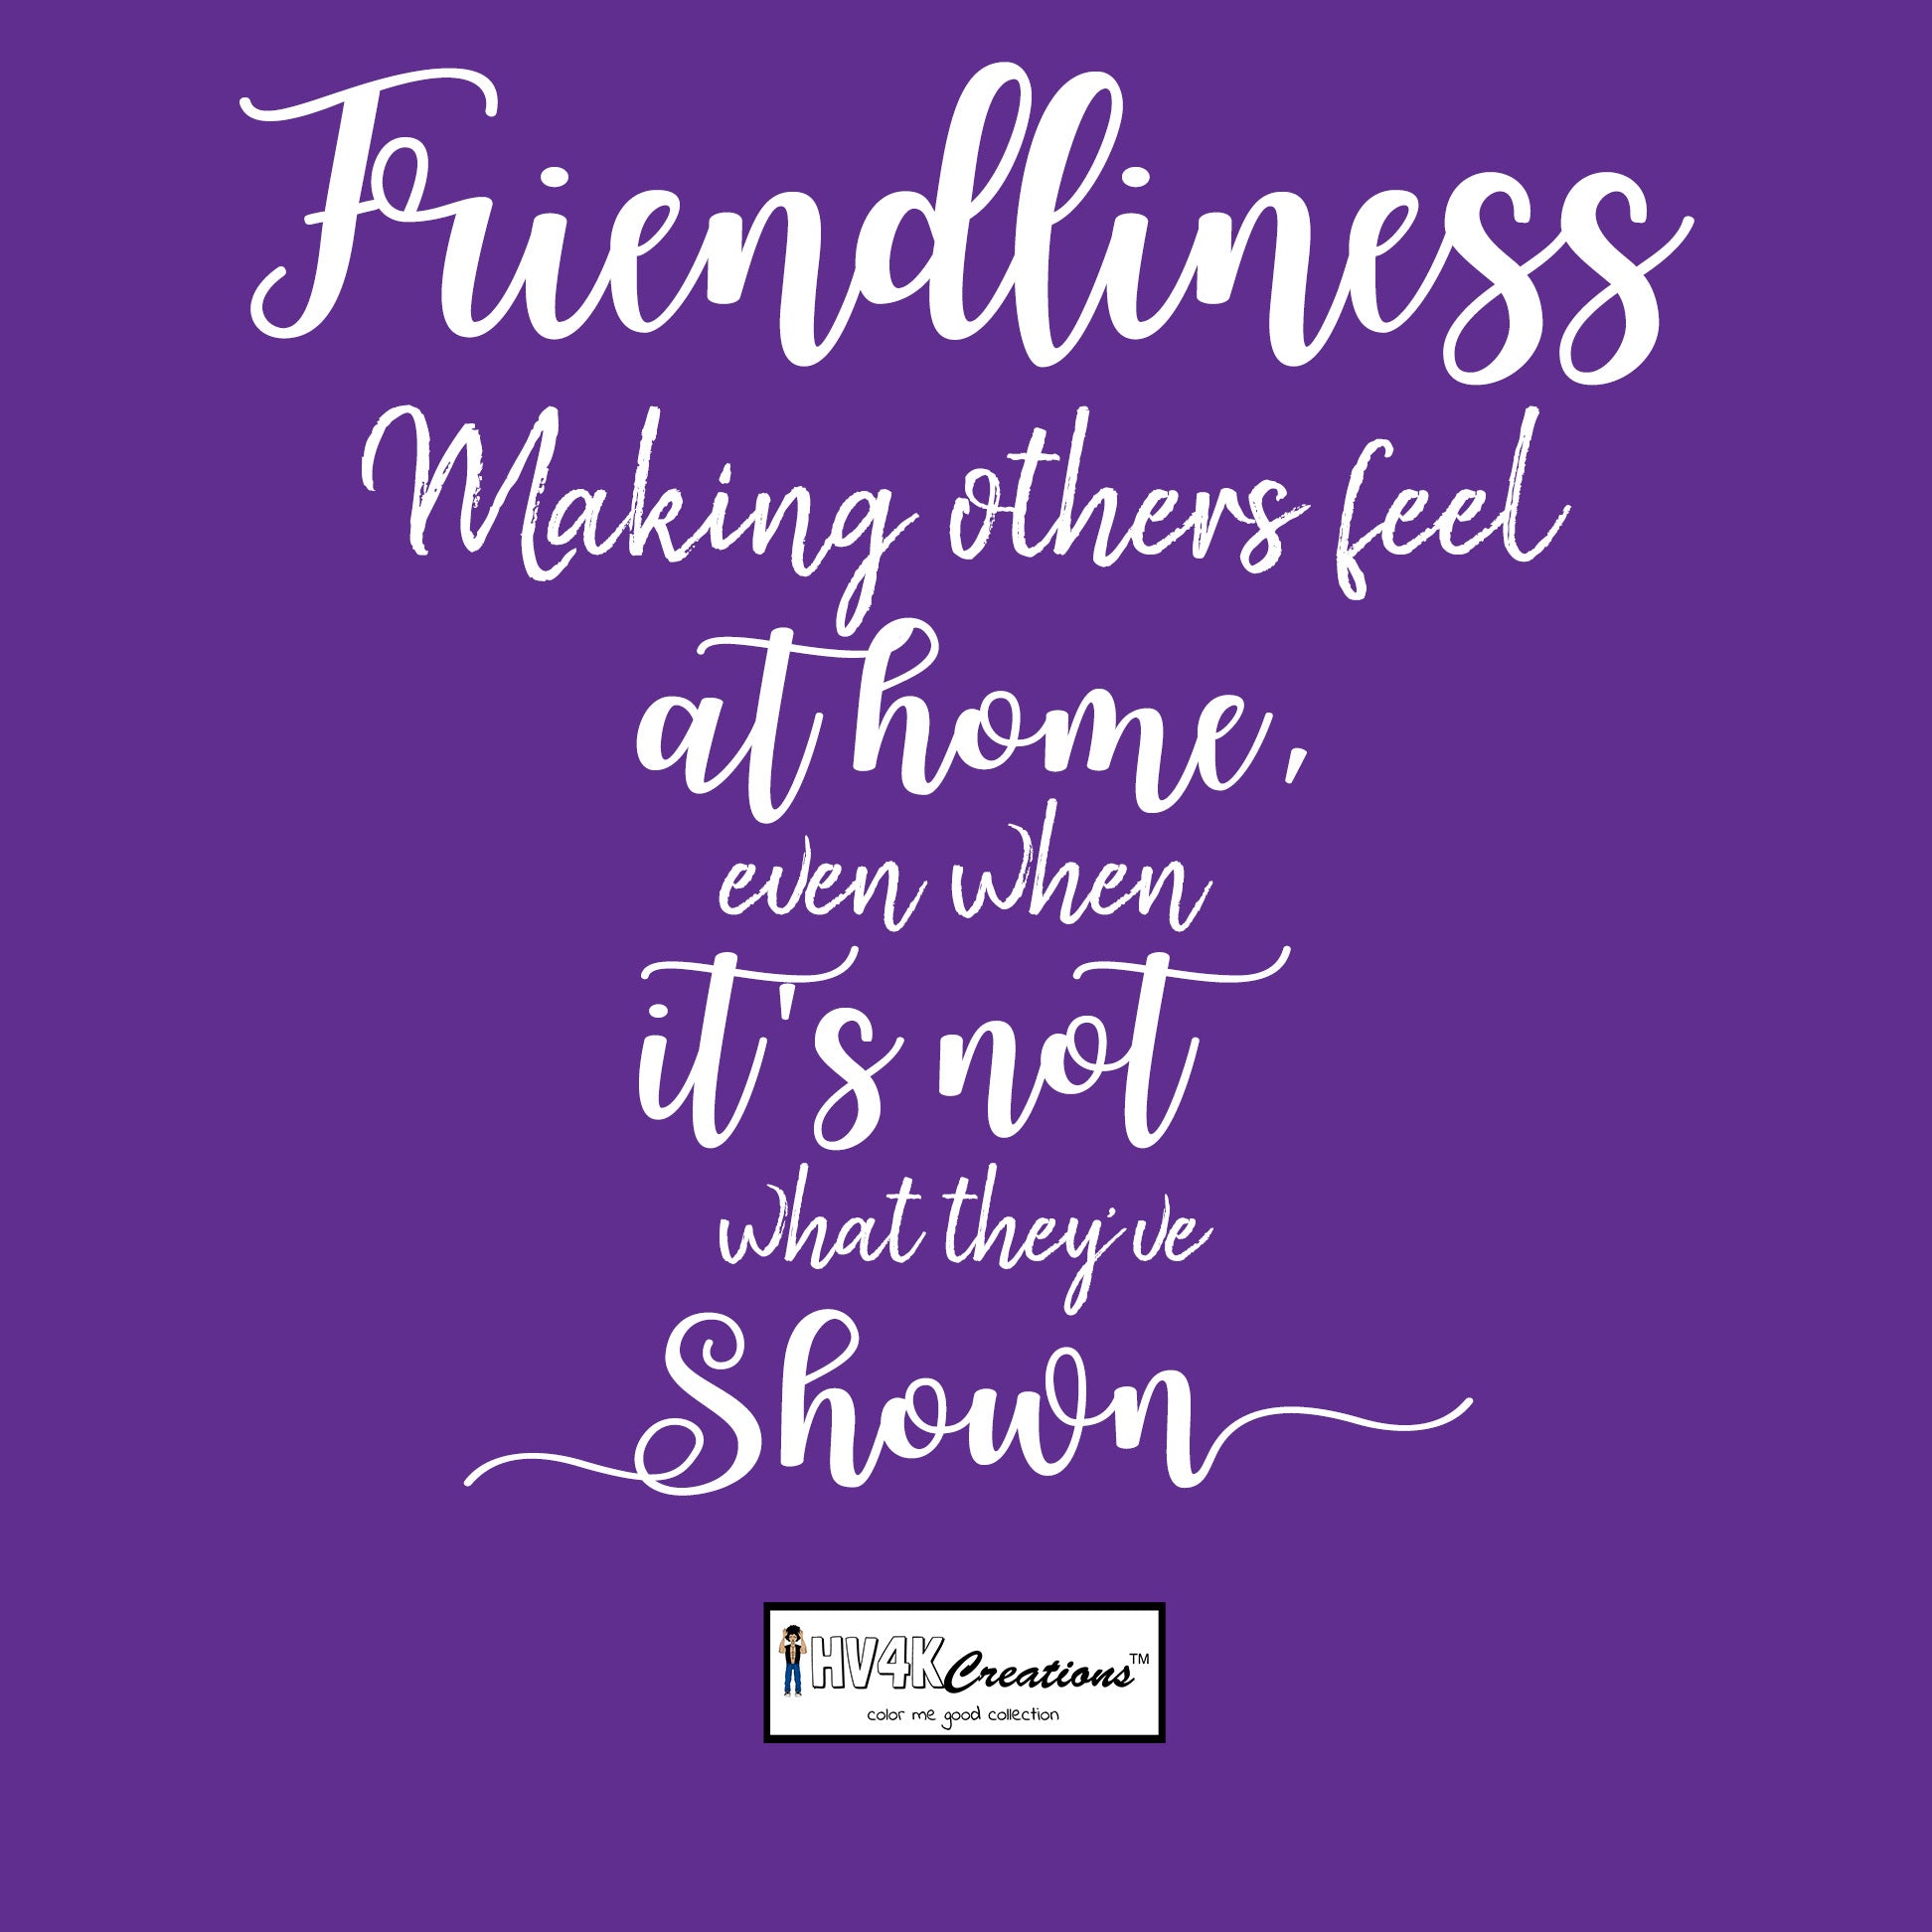 friendliness rhyme picture